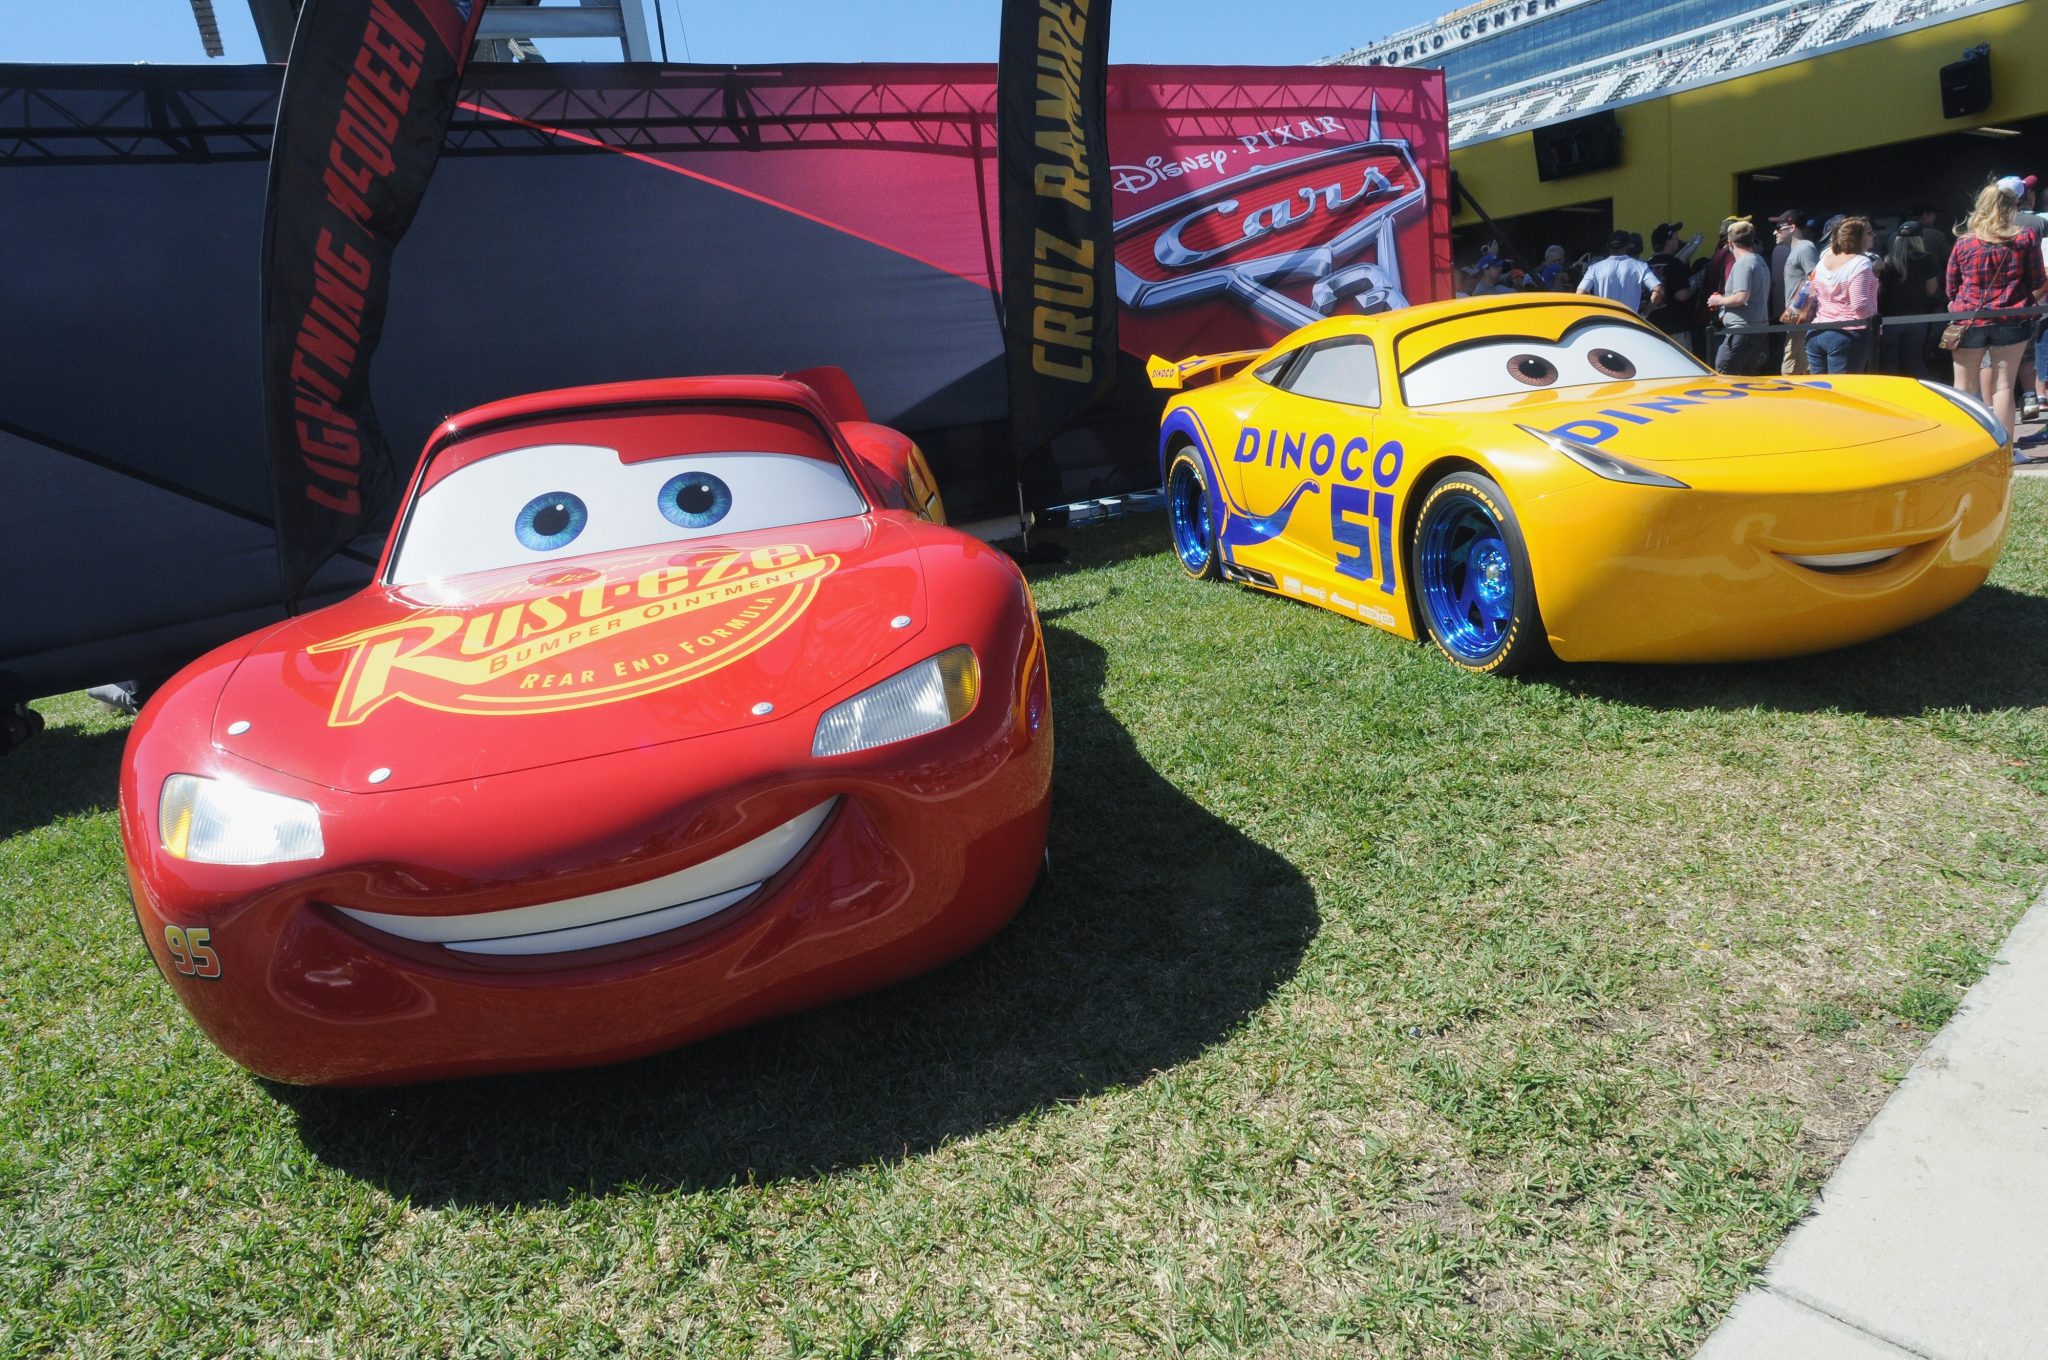 Disney-Pixar’s Cars 3 Hitting the Road on Nationwide Tour!